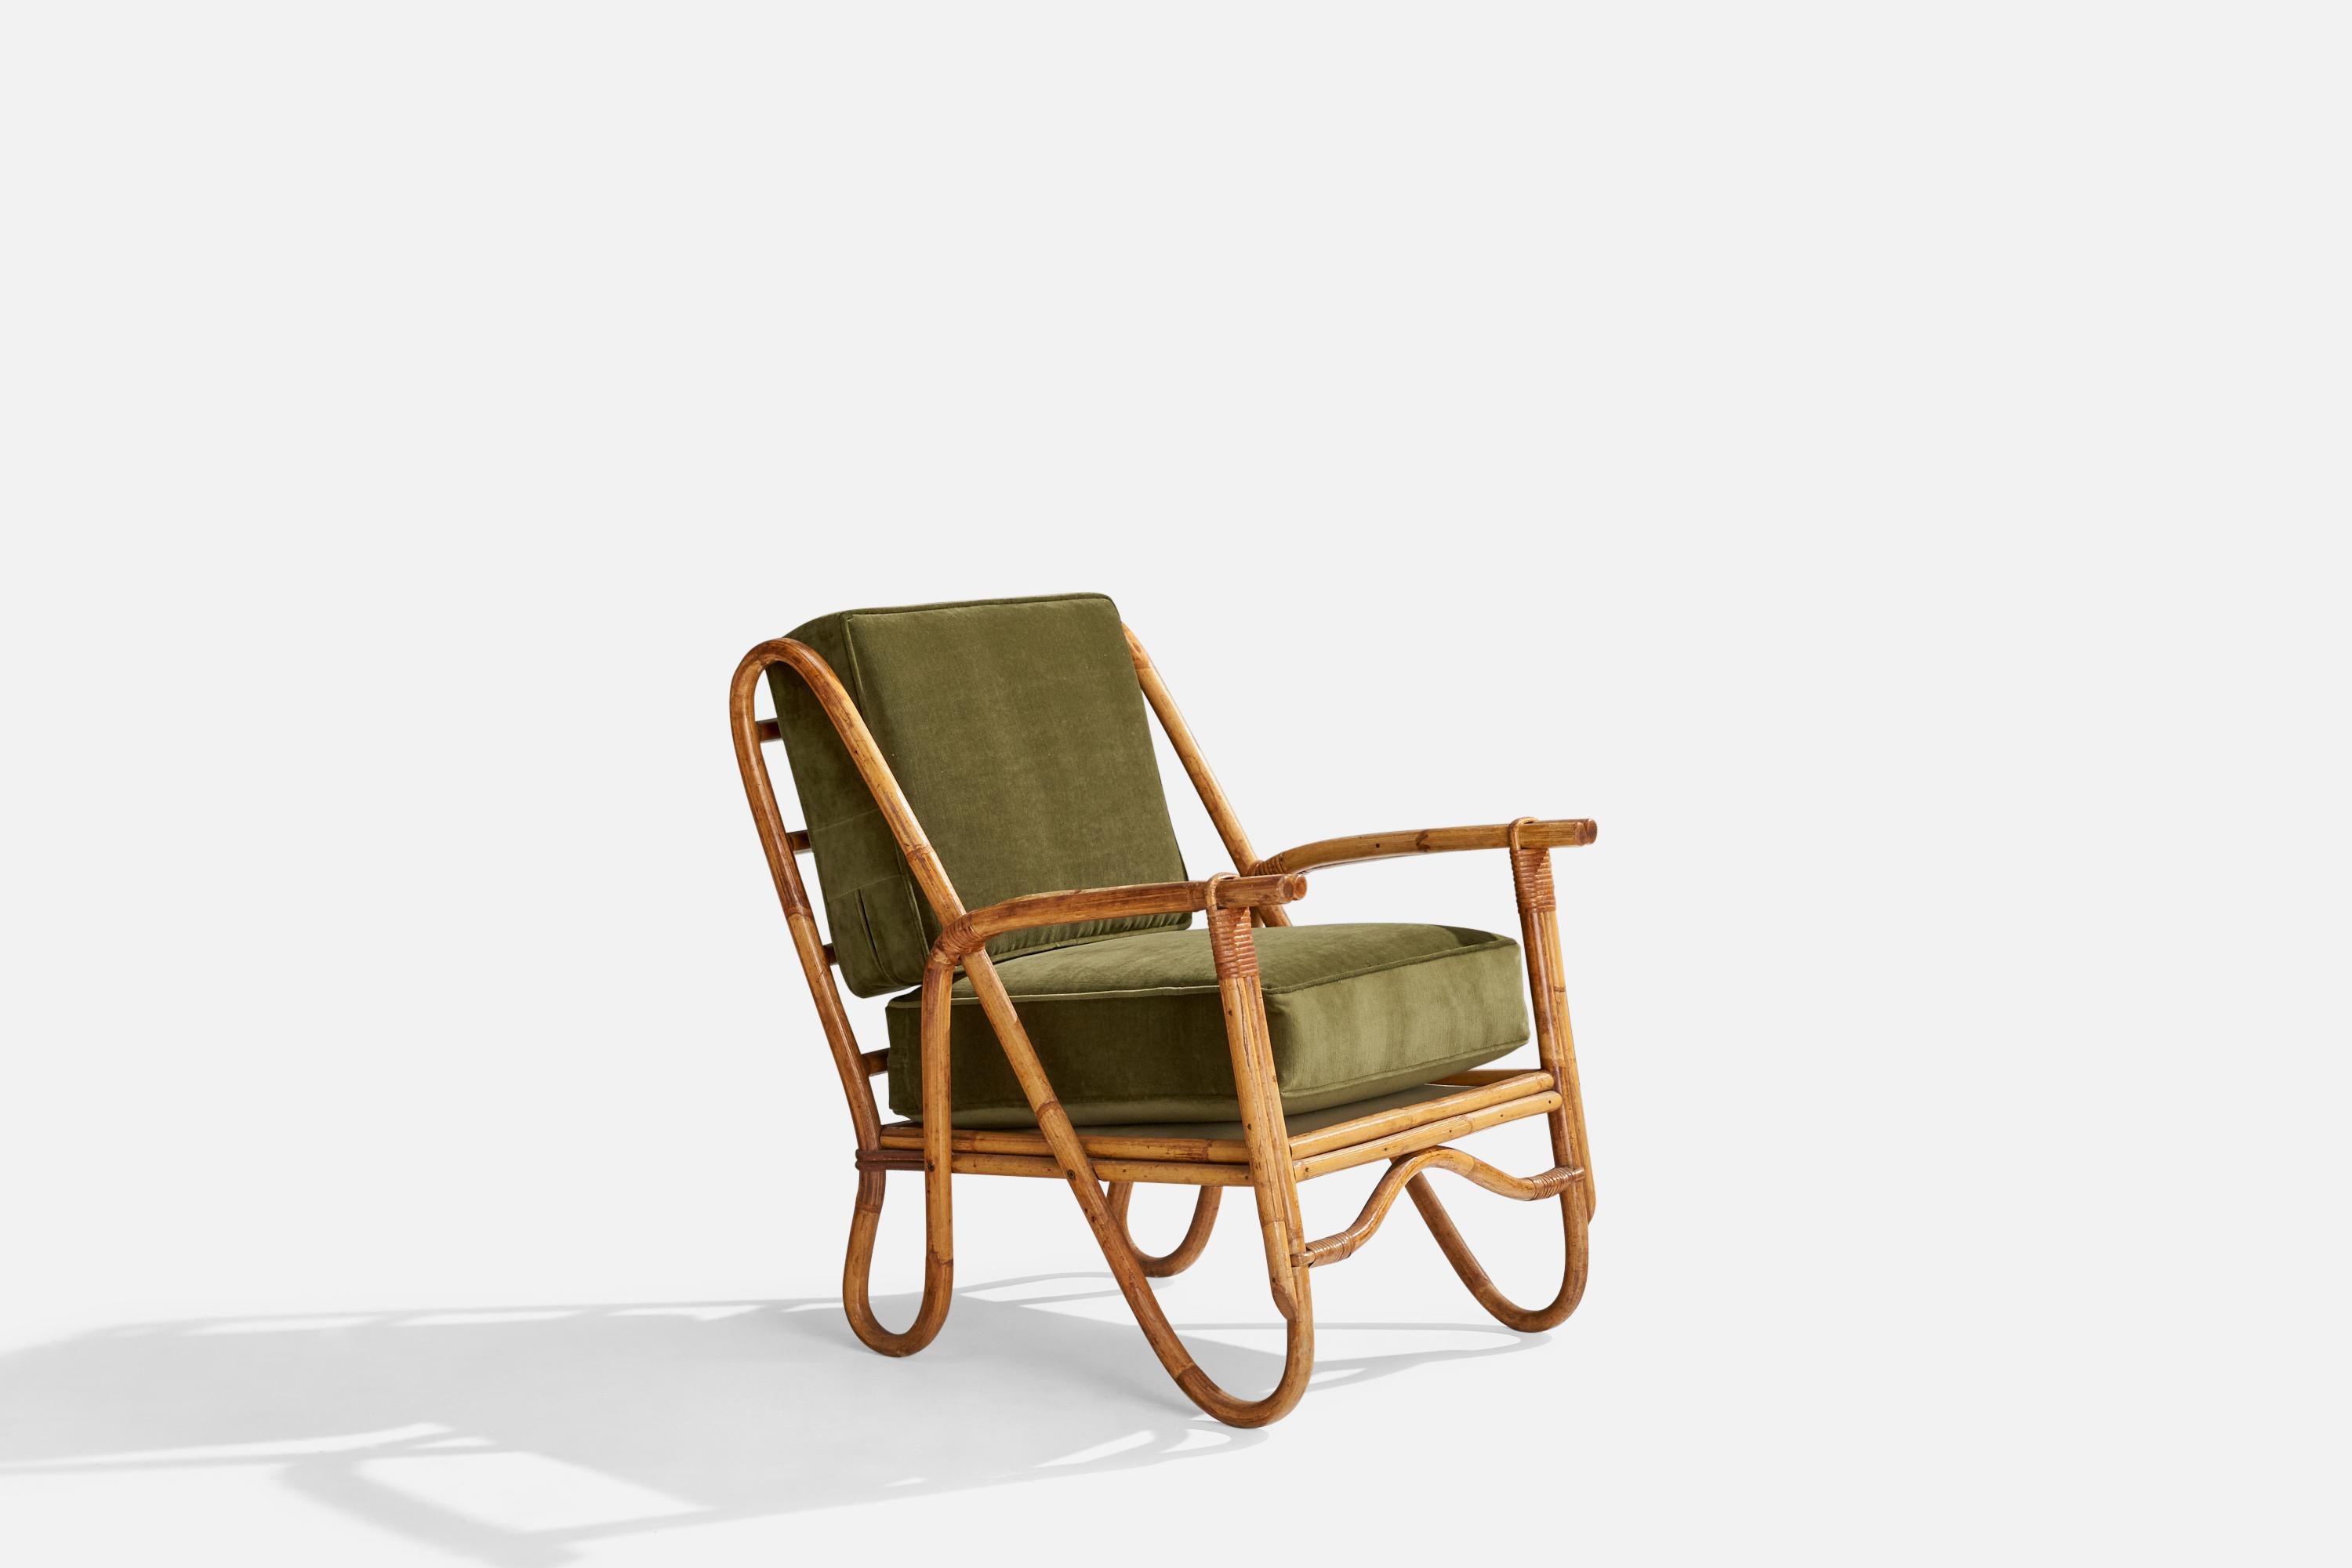 A moulded bamboo, rattan and green velvet lounge chair designed and produced in the US, c. 1950s.

Seat height: 18”